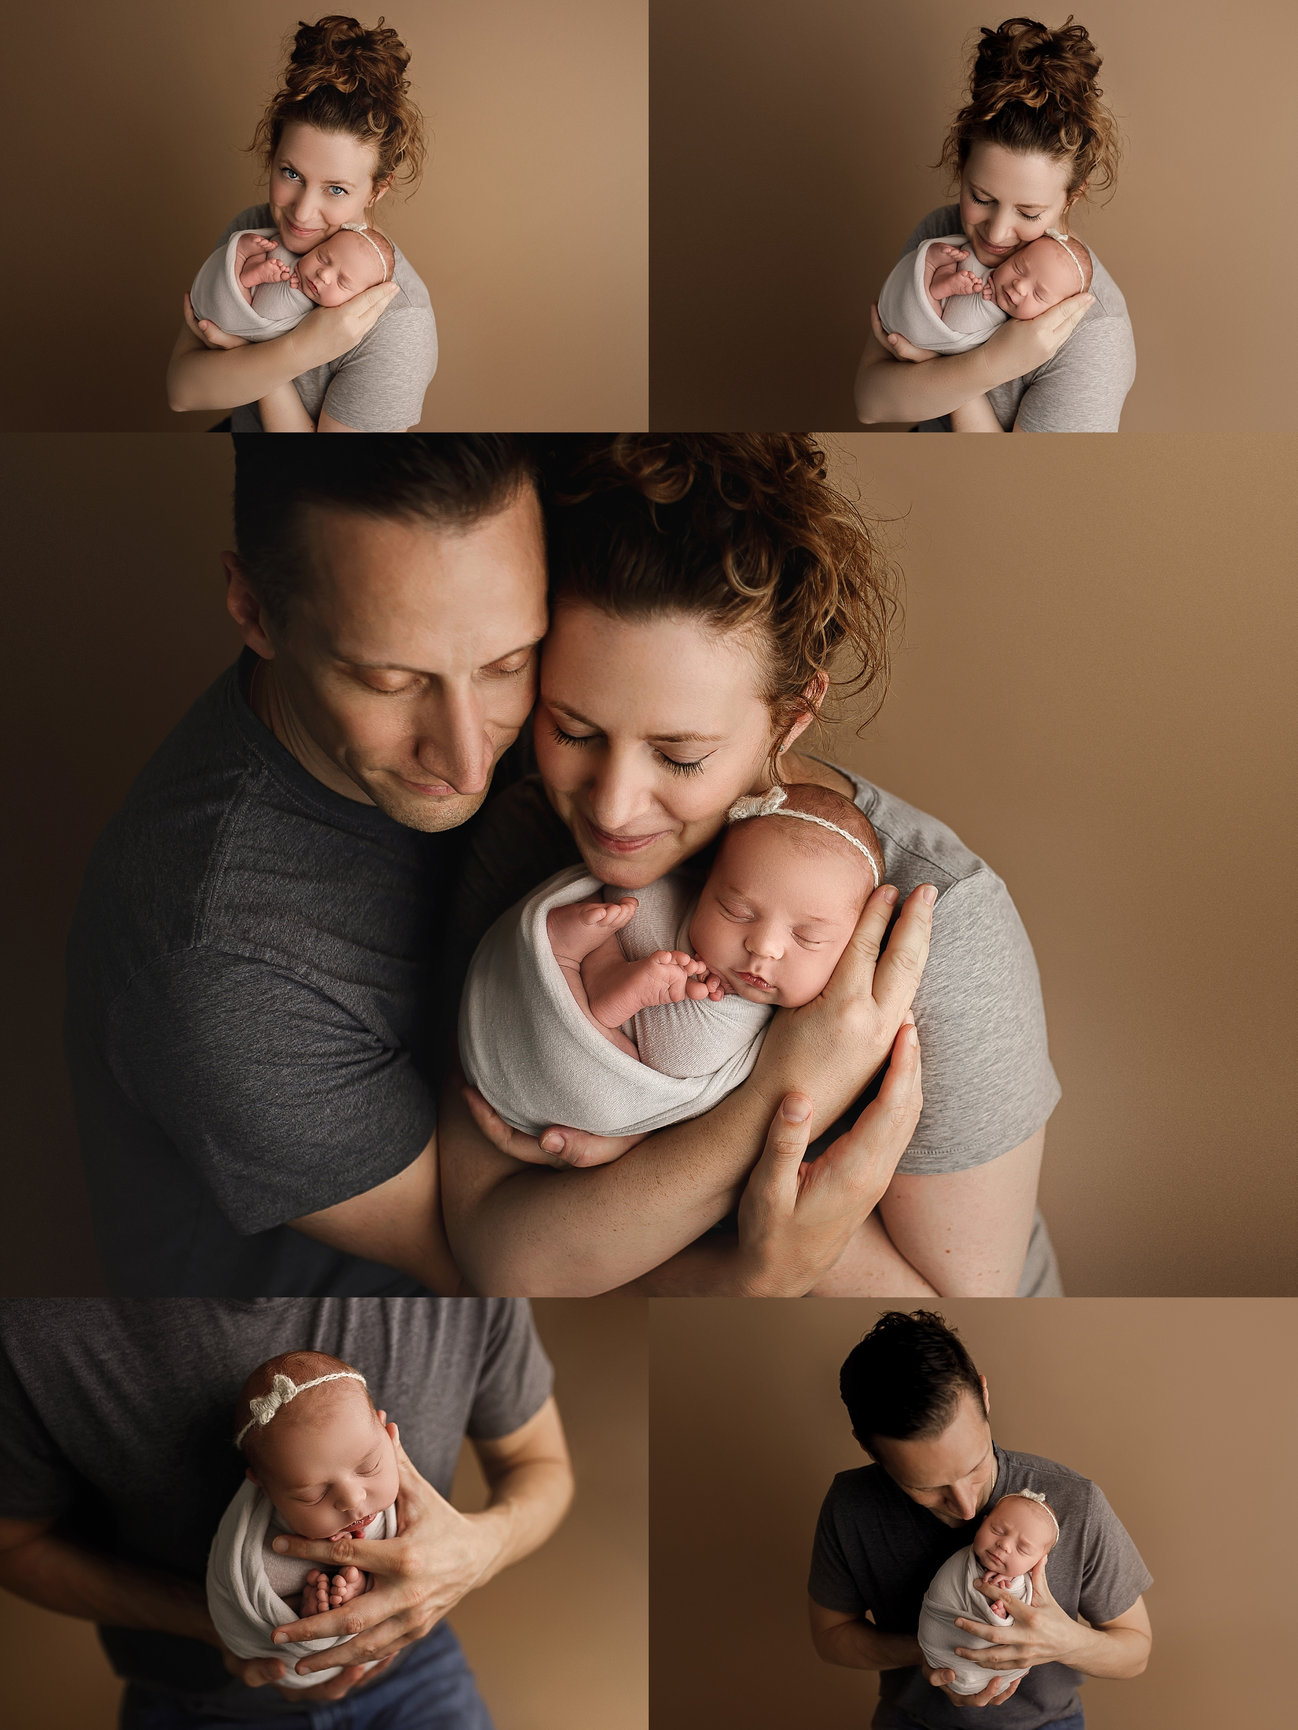 Parent Poses for Newborns - The Milky Way | Newborn photography poses,  Newborn photoshoot, Newborn posing